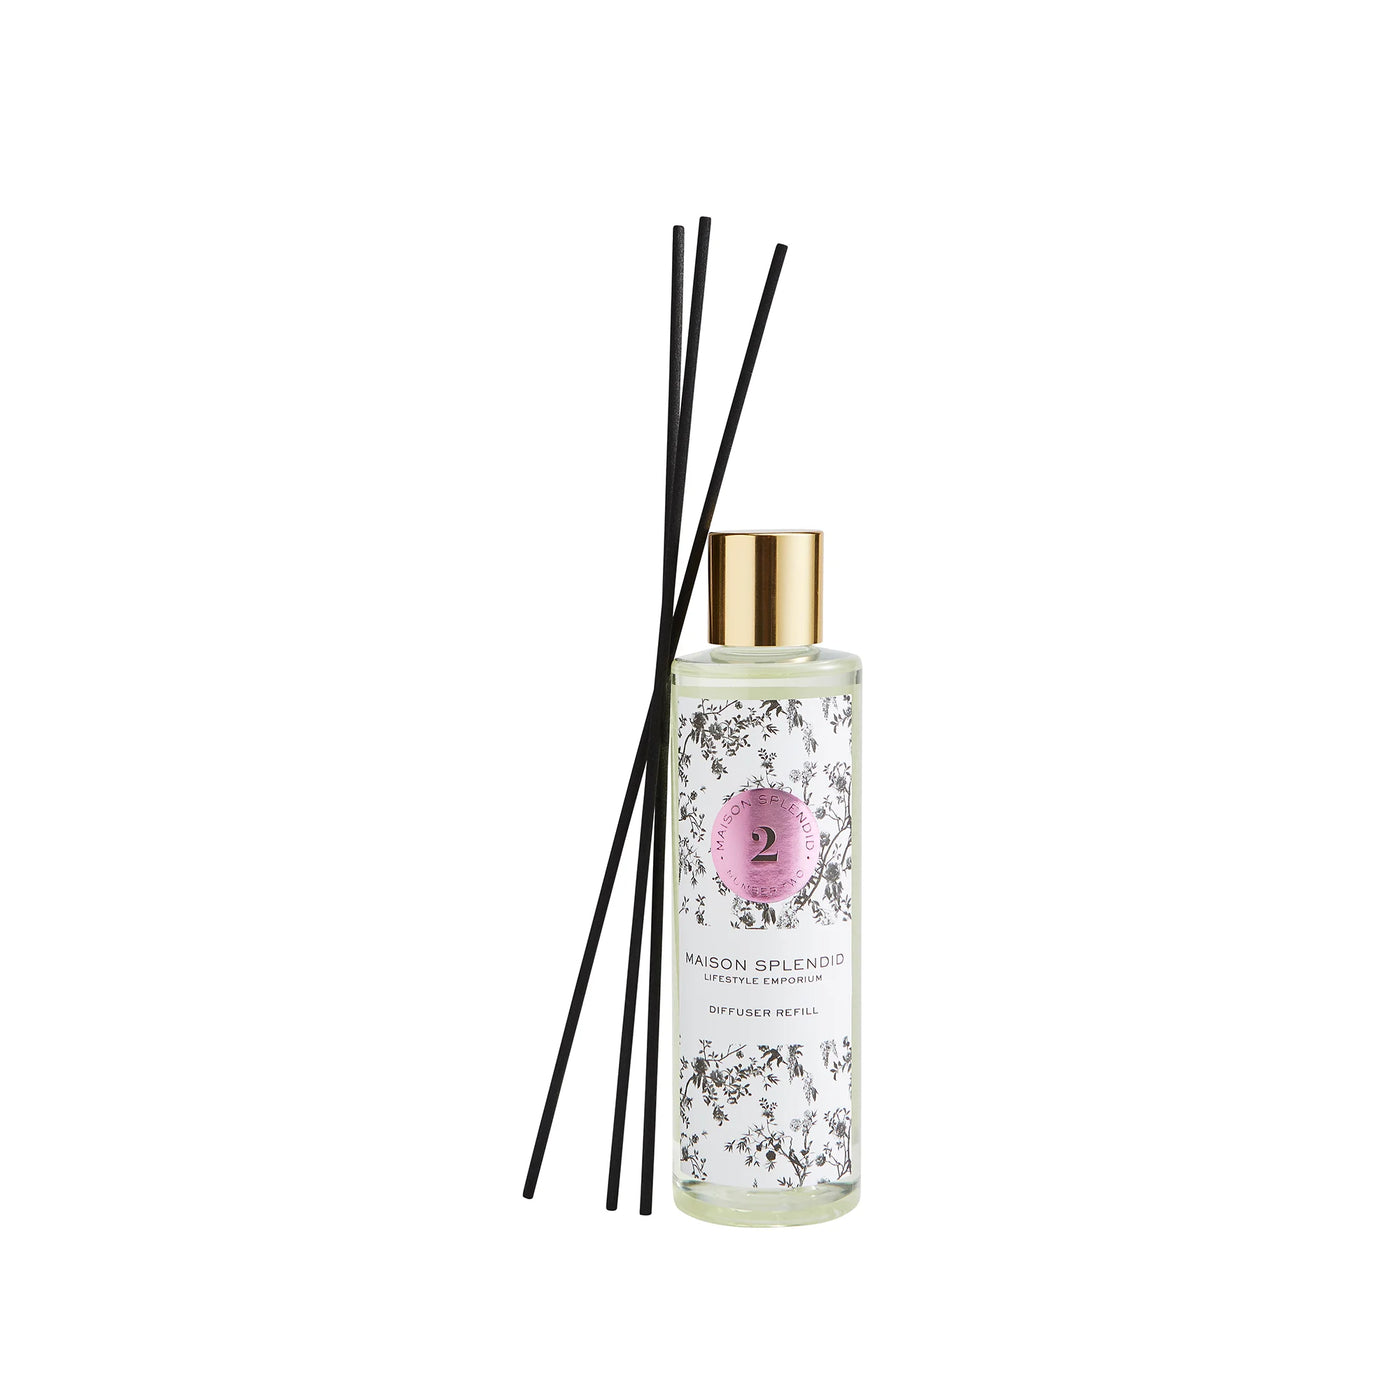 Maison Splendid diffuser refill scent number two